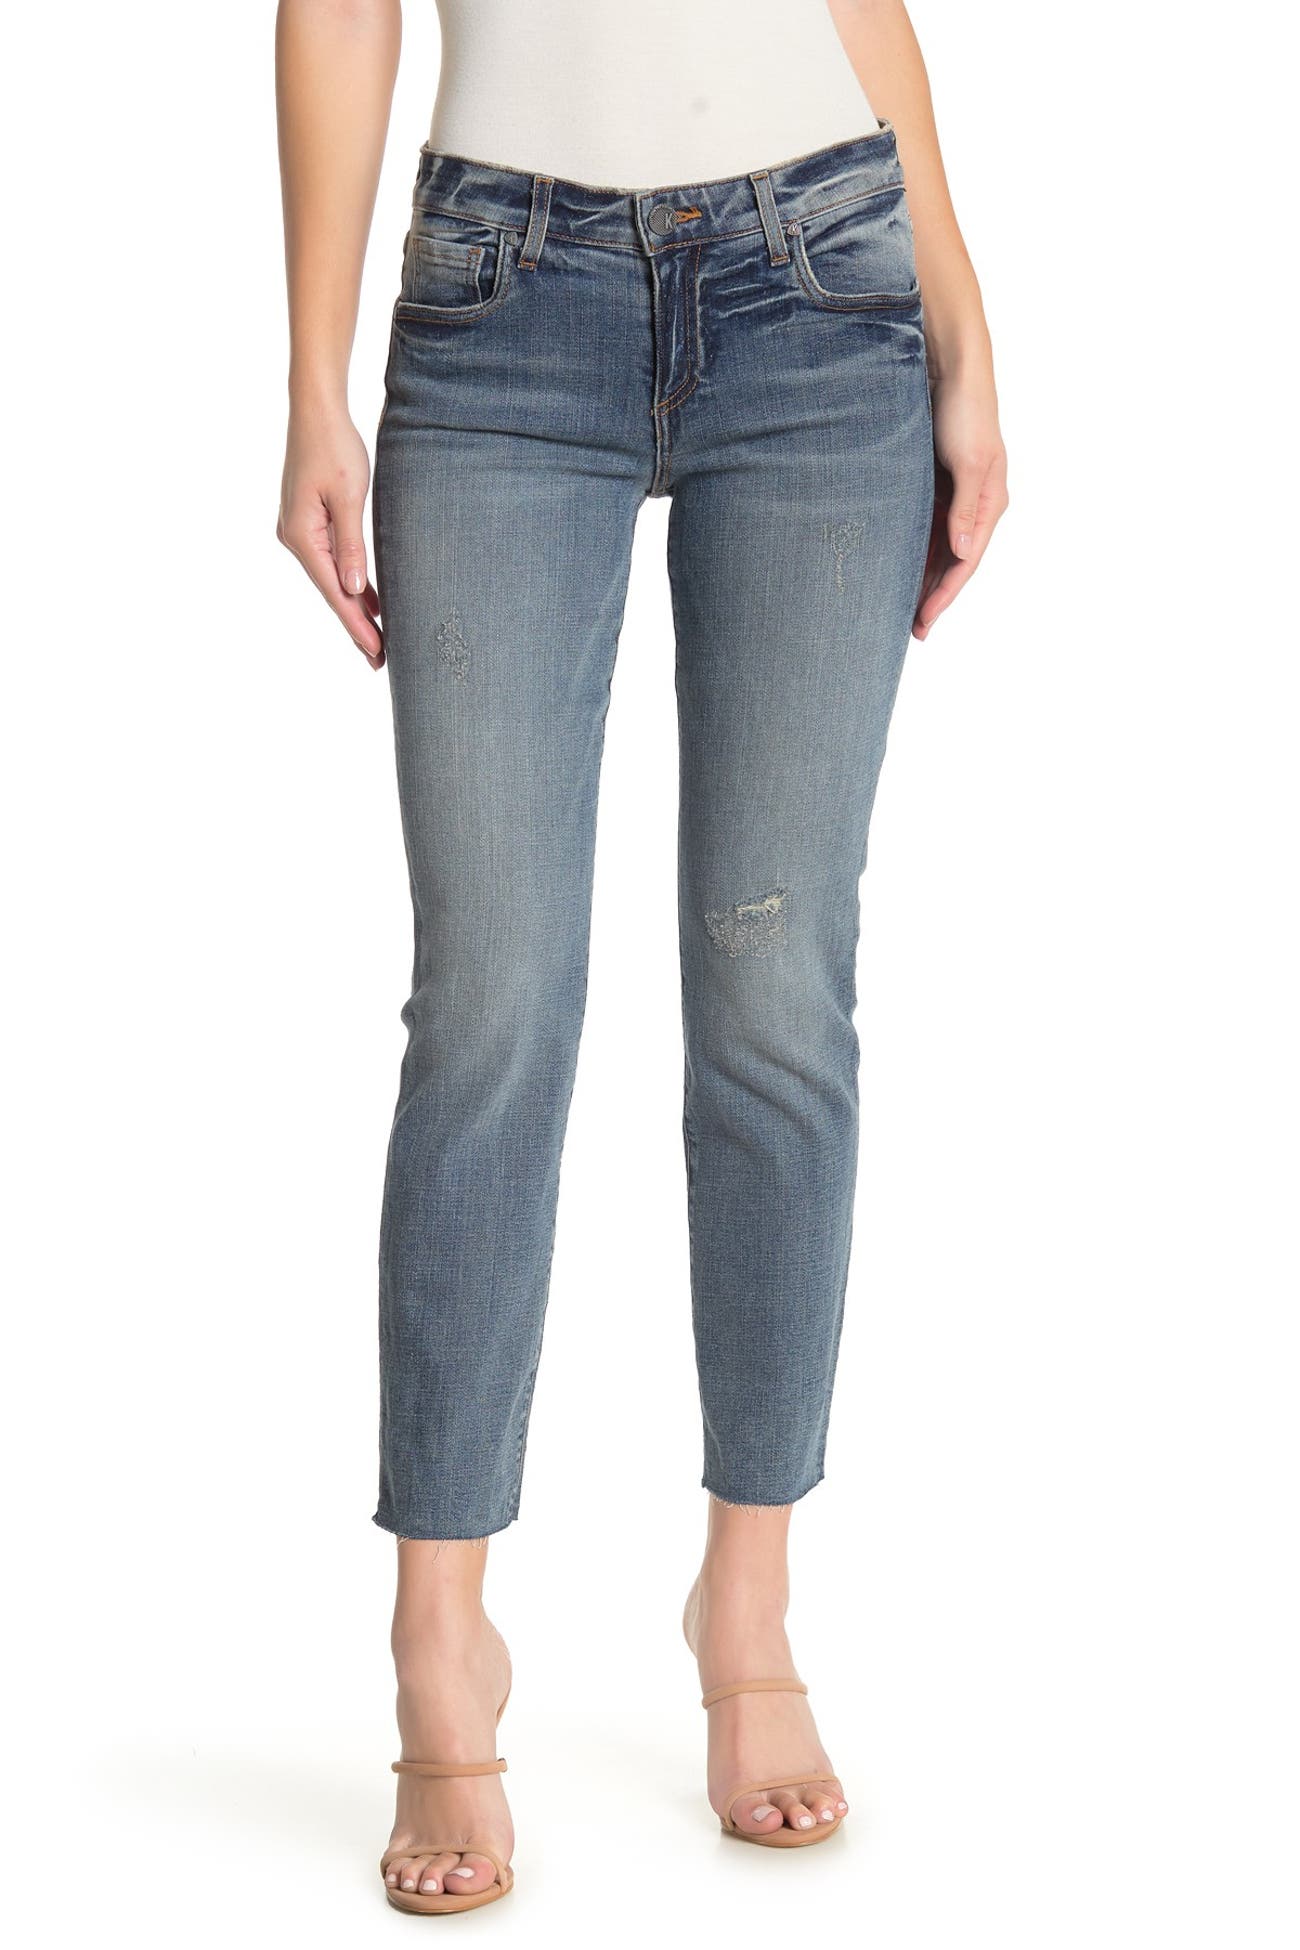 KUT from the Kloth | Reese Ankle Straight Leg Jeans | Nordstrom Rack